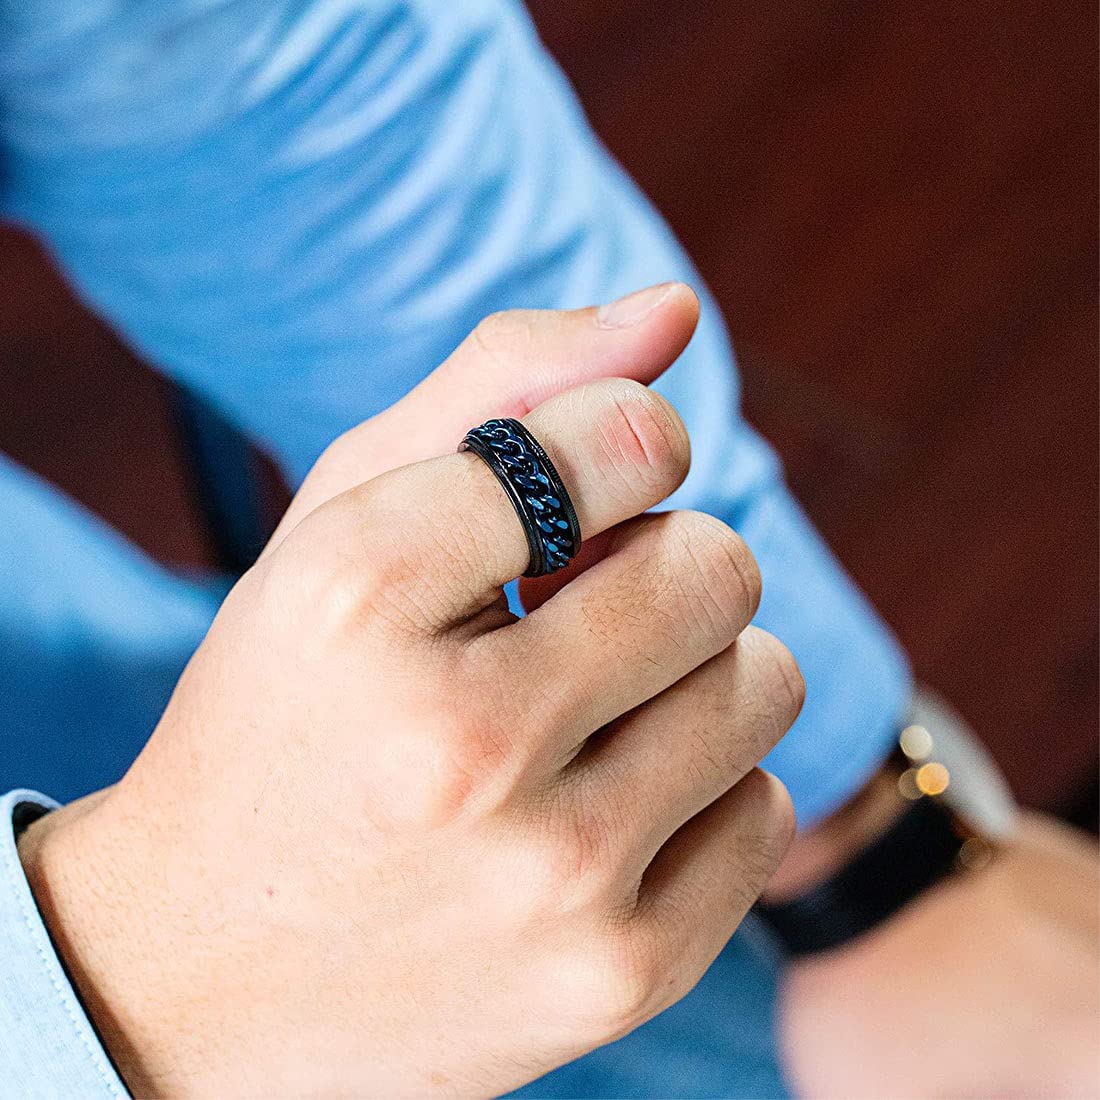 Yellow Chimes Rings for Men 2 pcs Stainless Steel Black and Blue Stainless Steel Band Designed Rings for Men and Boys